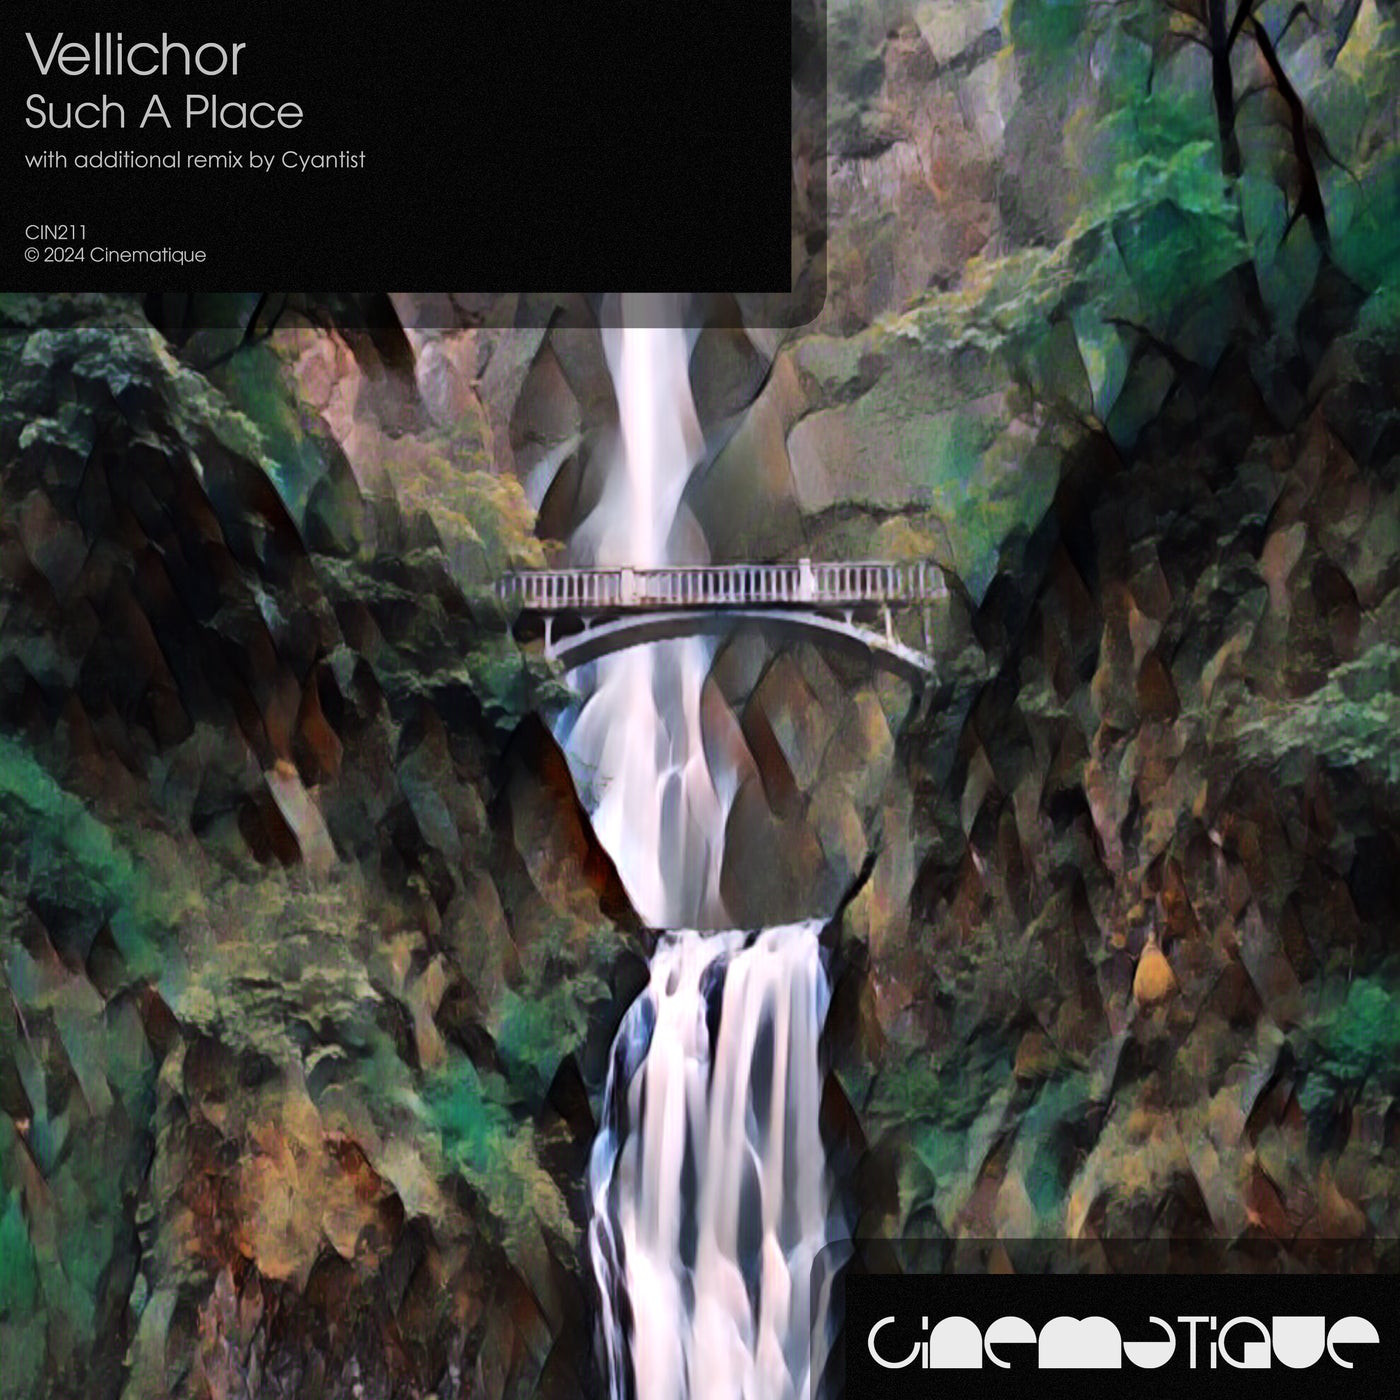 image cover: Vellichor - Such A Place [CIN211] on Cinematique